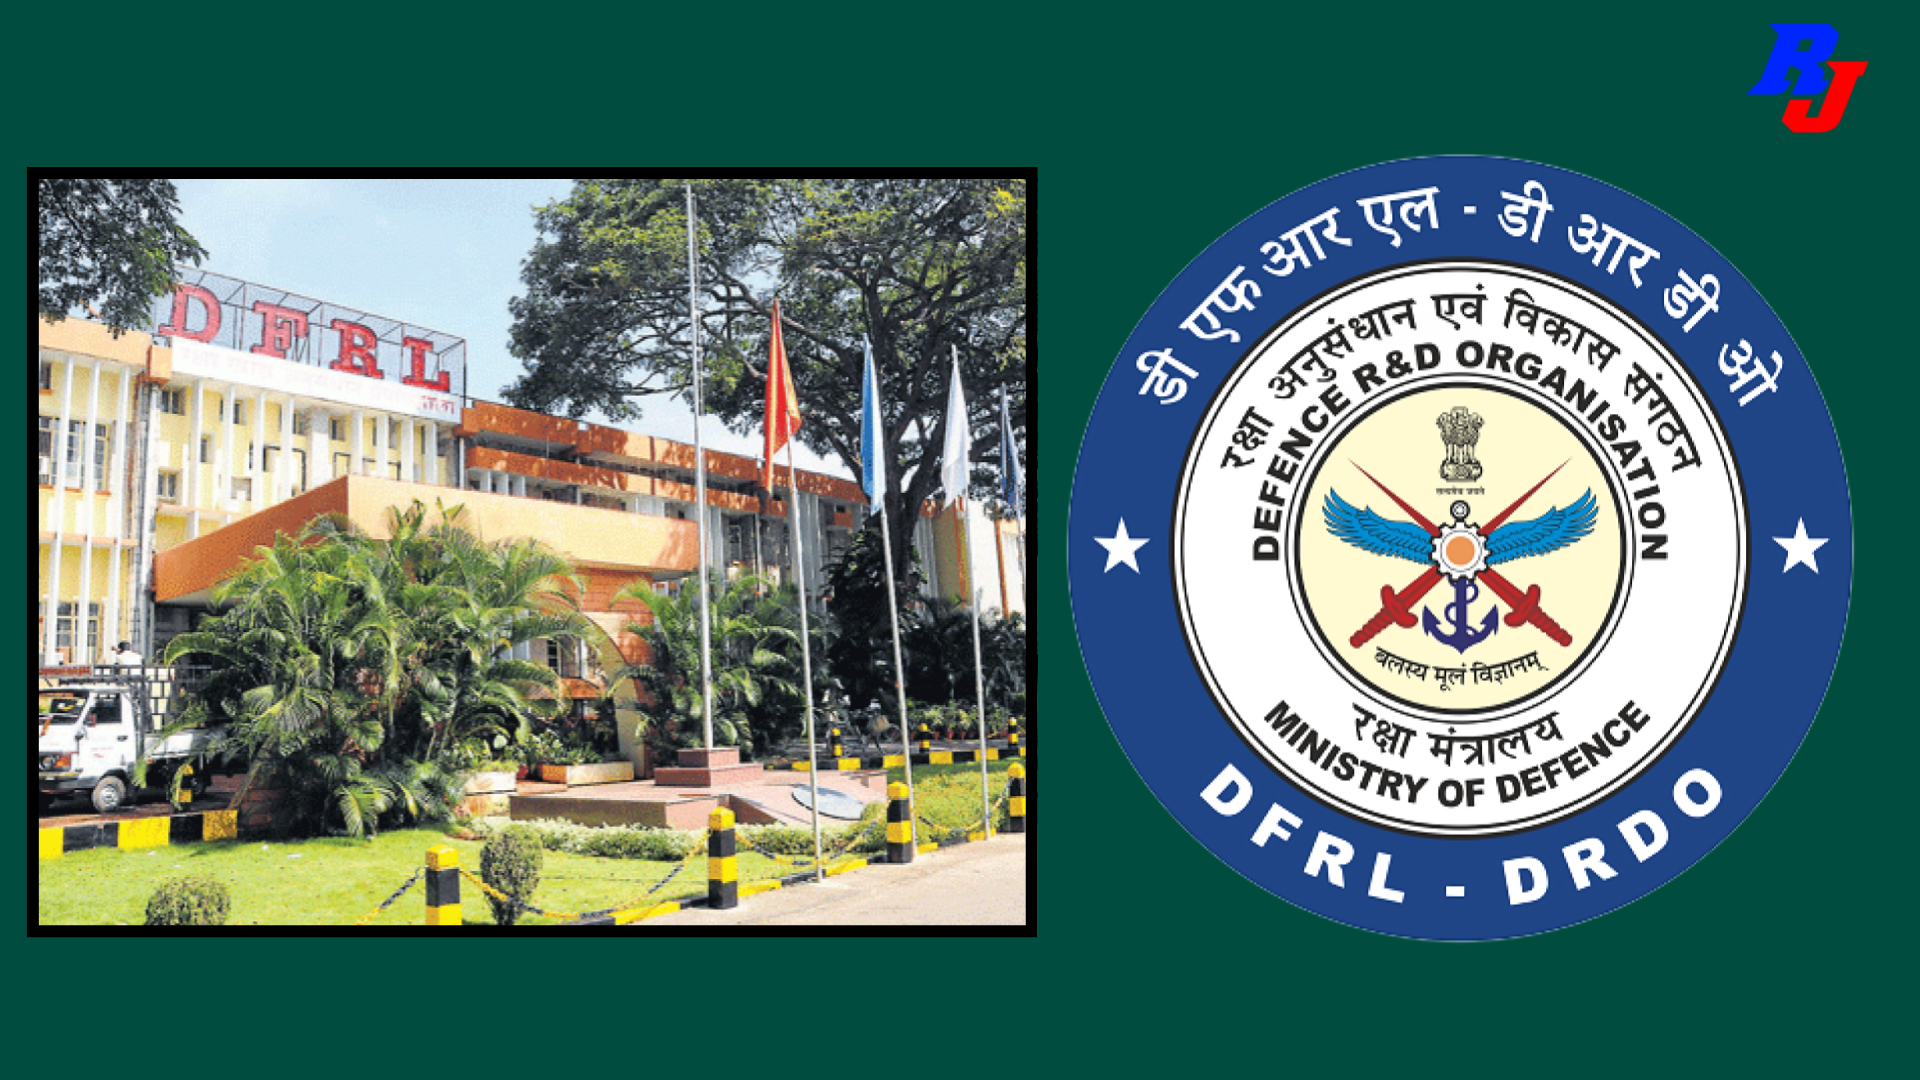 Research Associate (RA) in DFRL, DRDO, Mysore, India, Apply by 31 October 2021